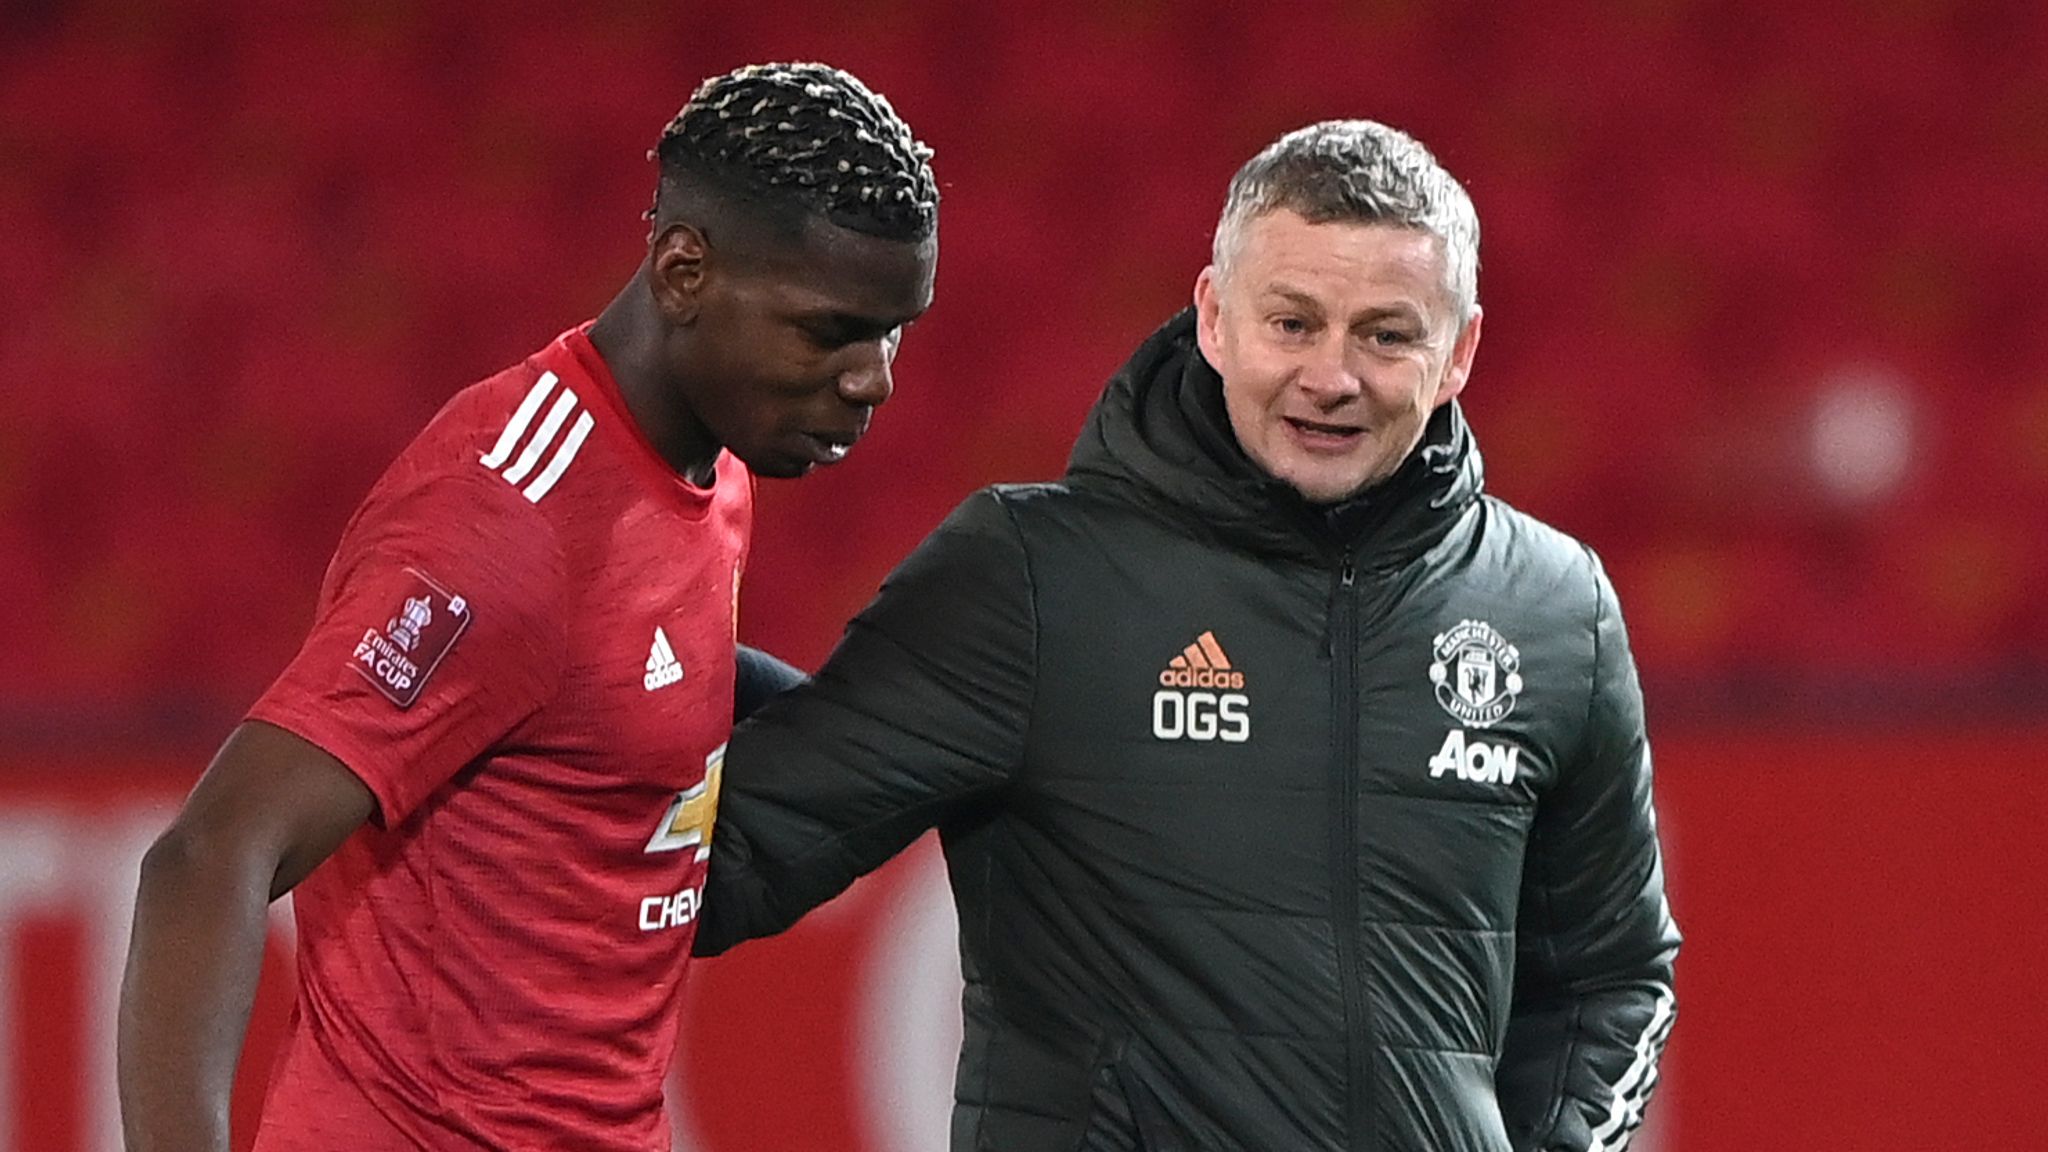 Paul Pogba Wants To Stay At United But Not With Solskjaer As Manager